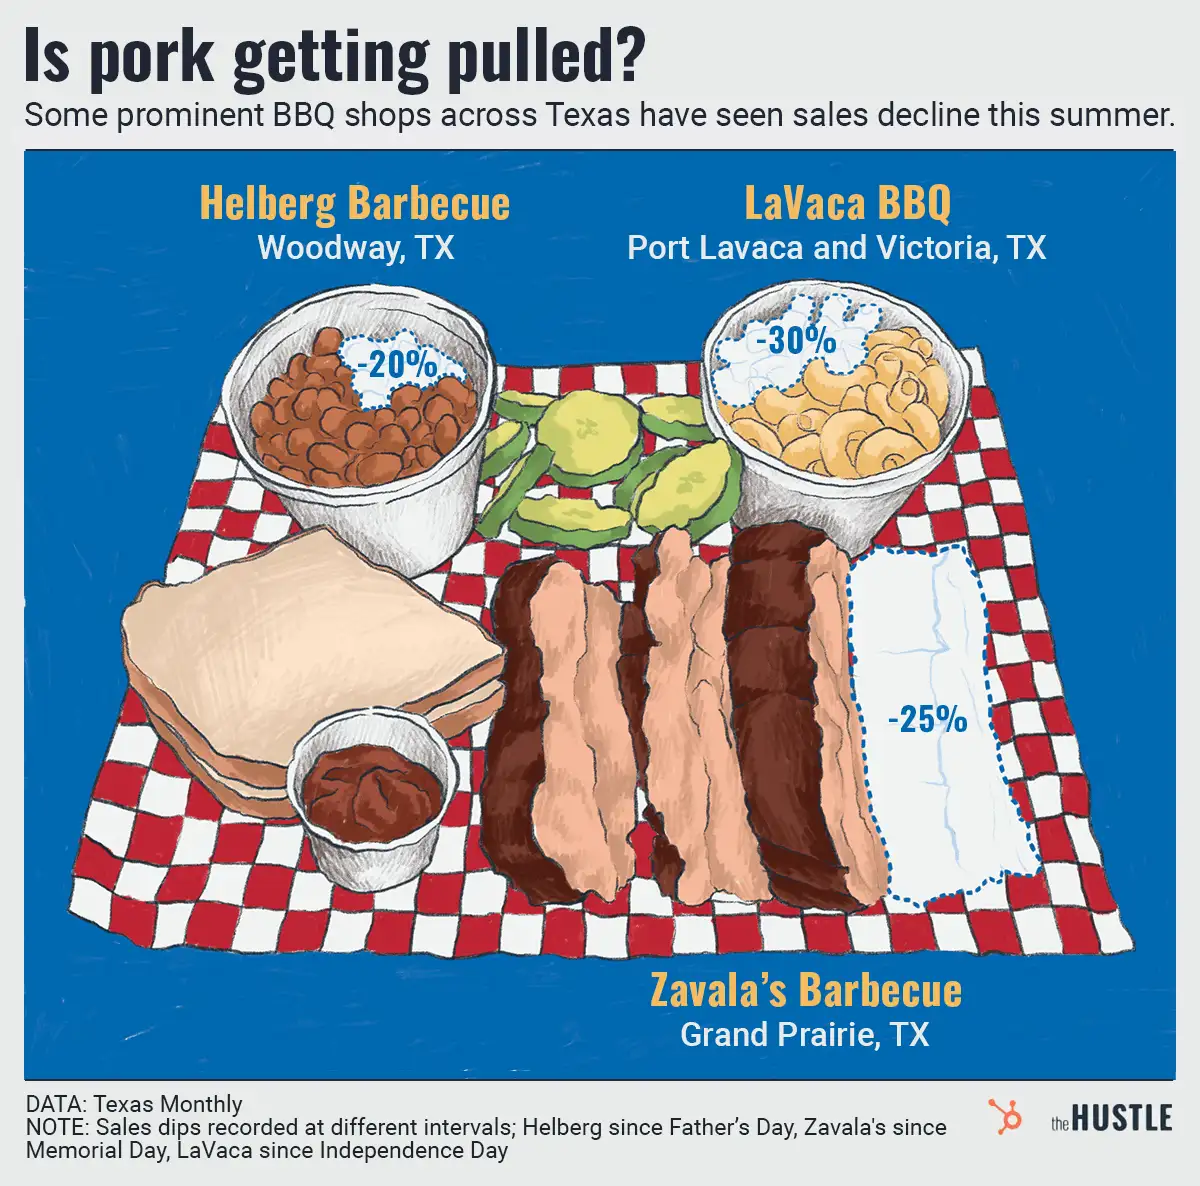 Holy smokes, there may actually be a limit to Texans’ love of barbecue